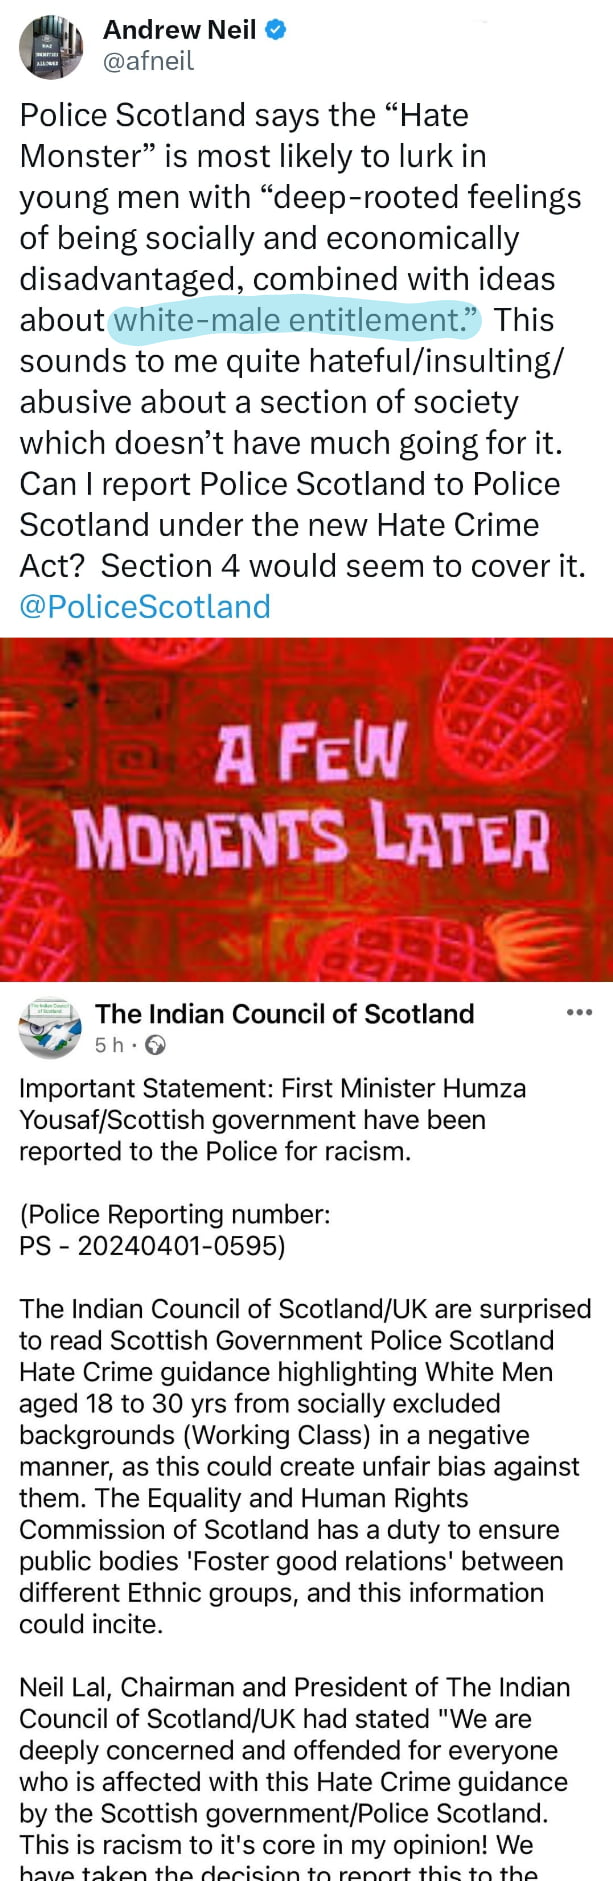 Scotland's new hate laws: So The Indian Council has reported